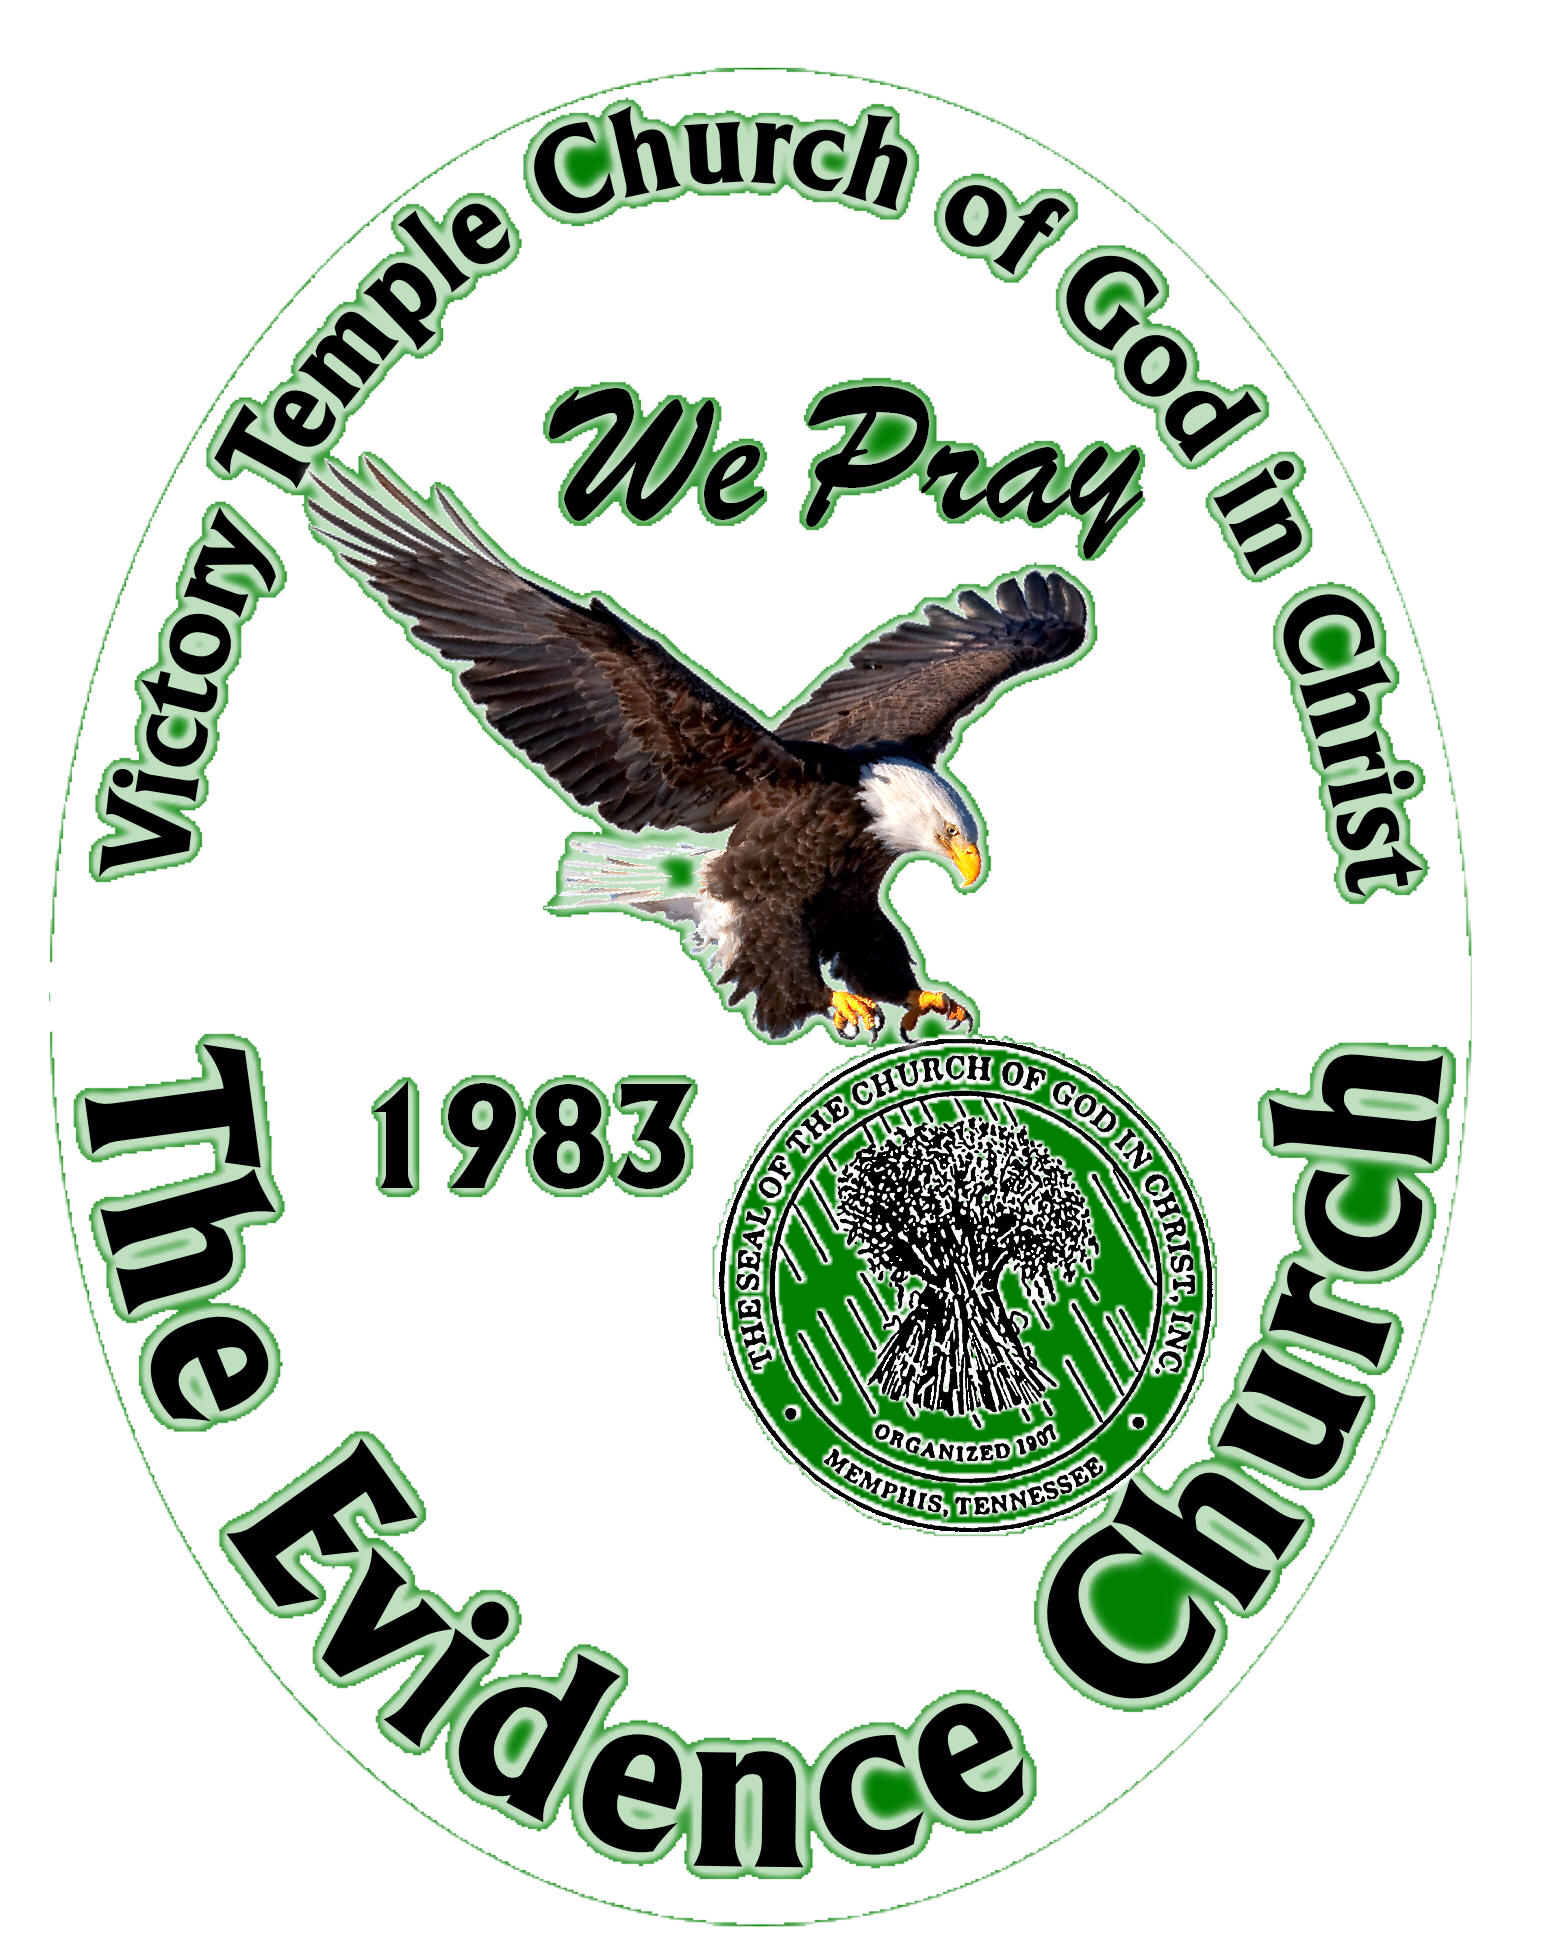 Victory Temple Church of God in Christ Emblem